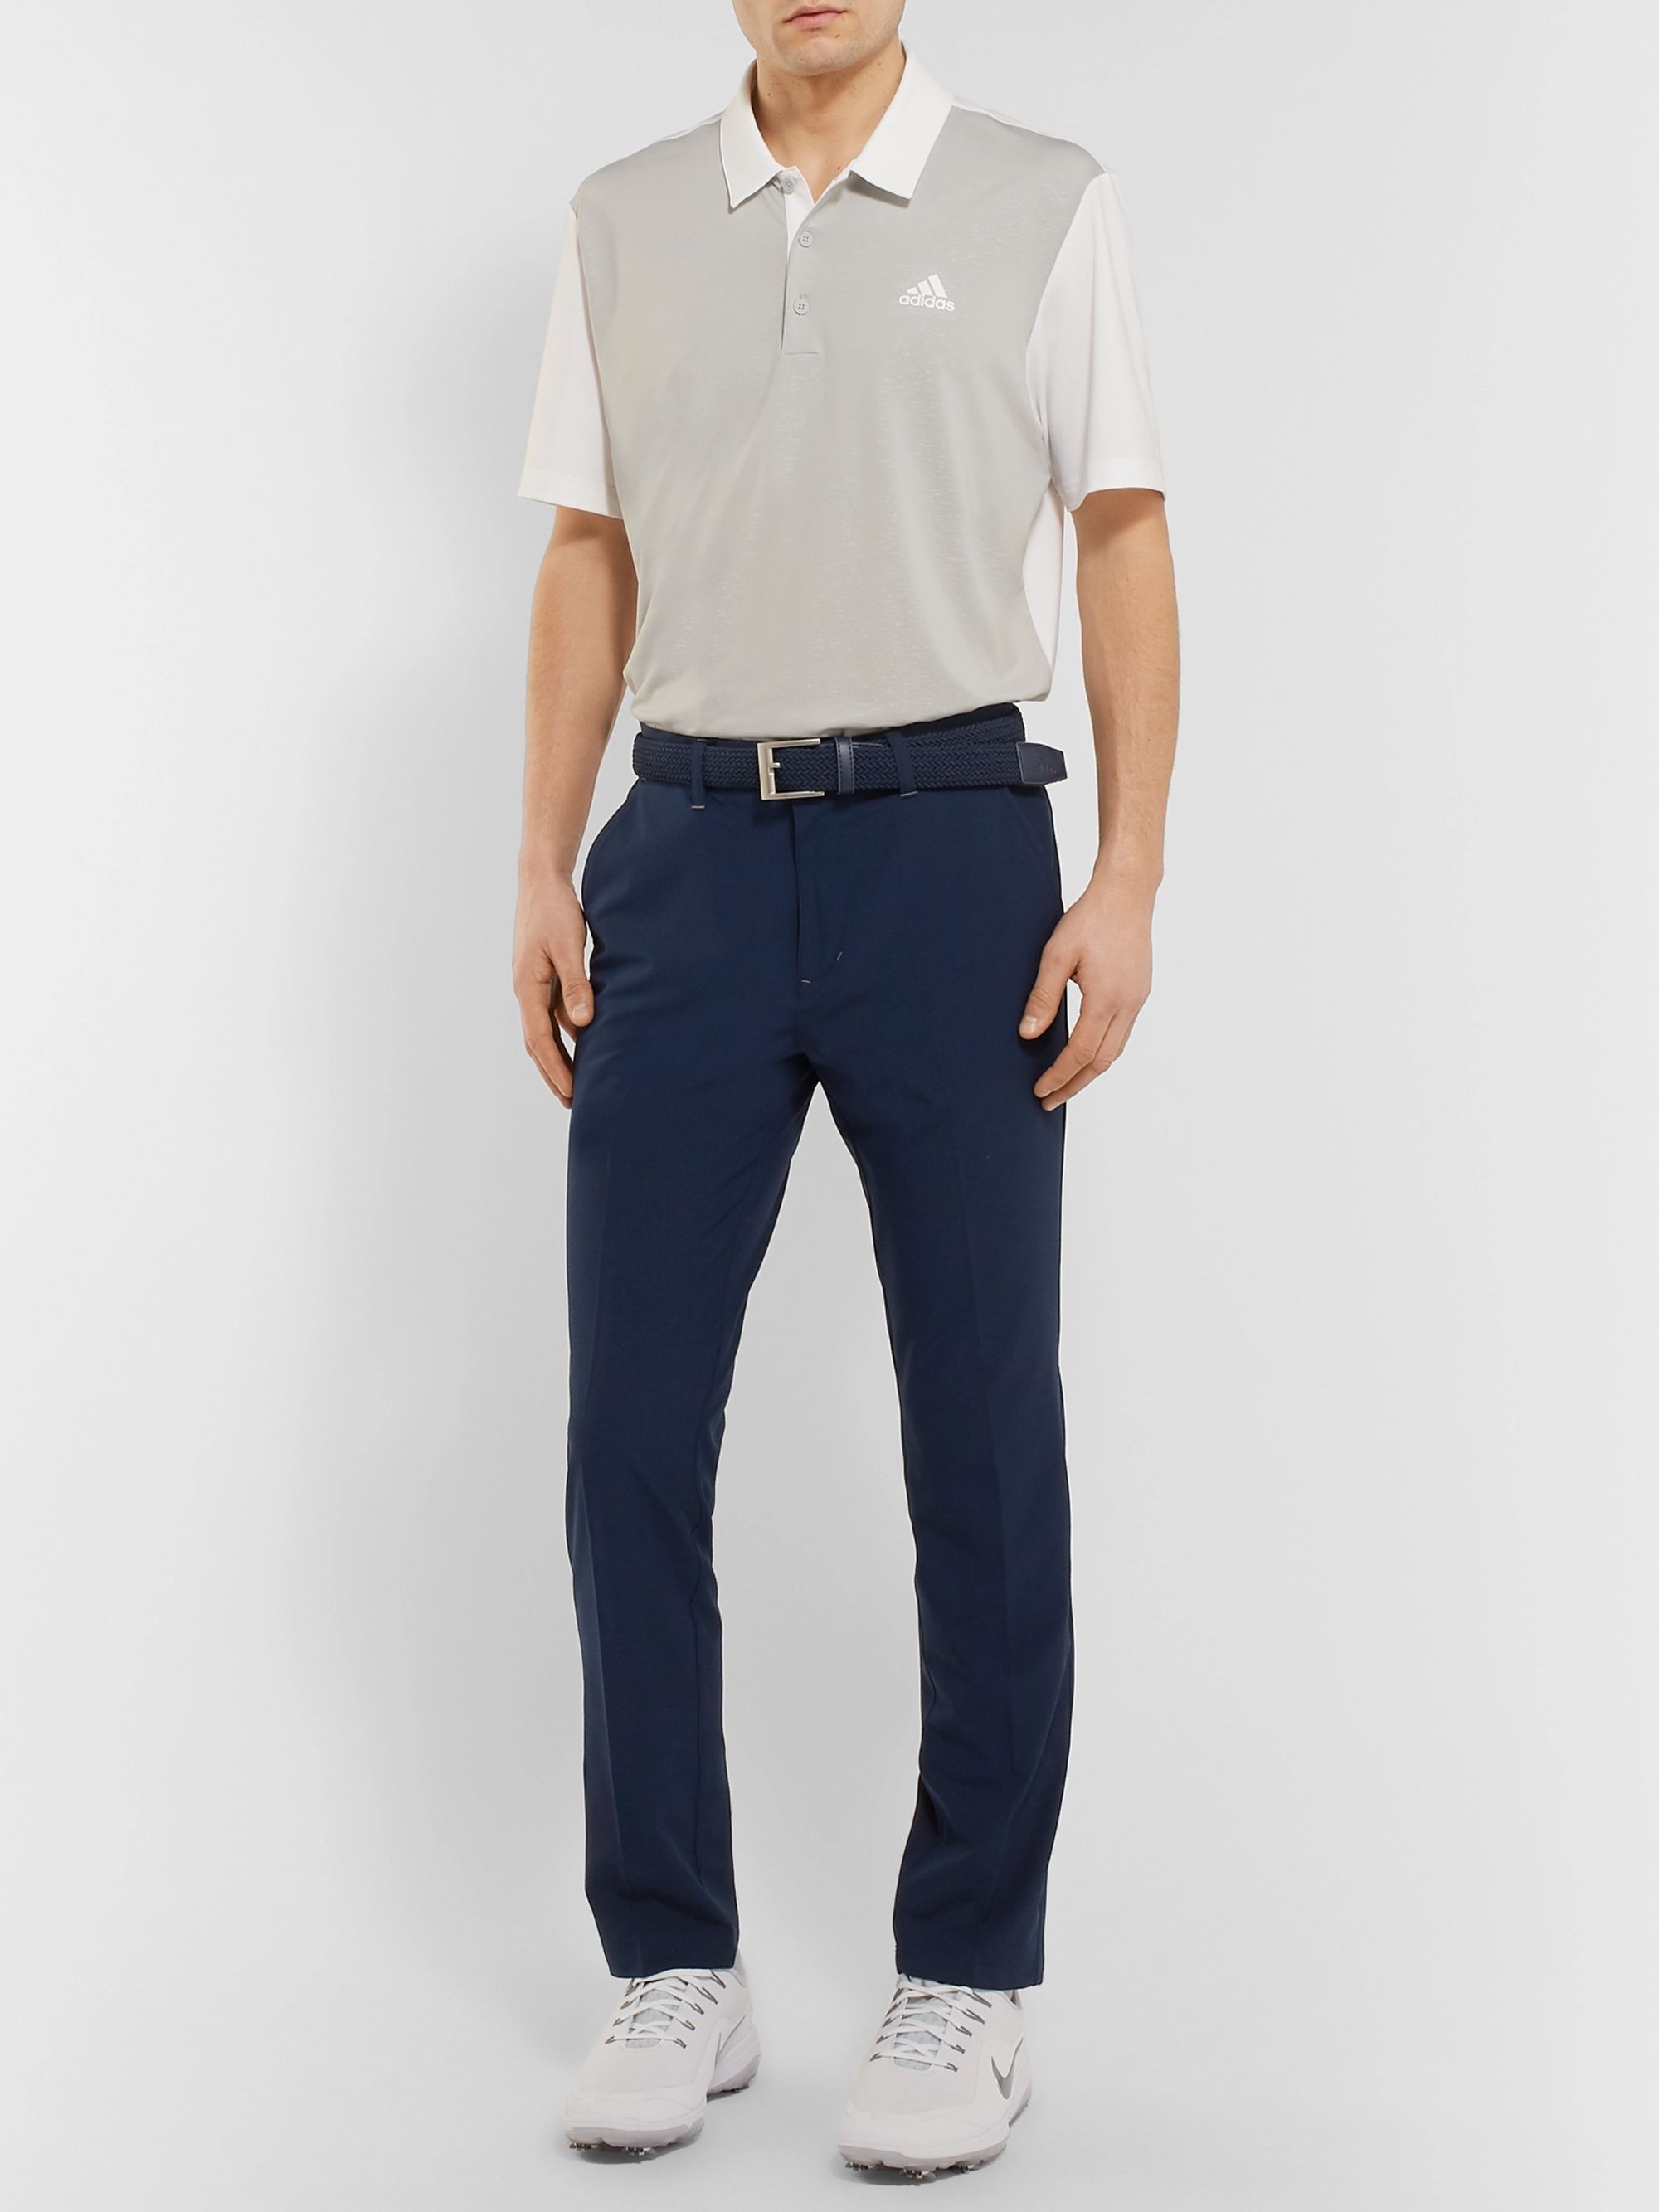 adidas golf trousers navy